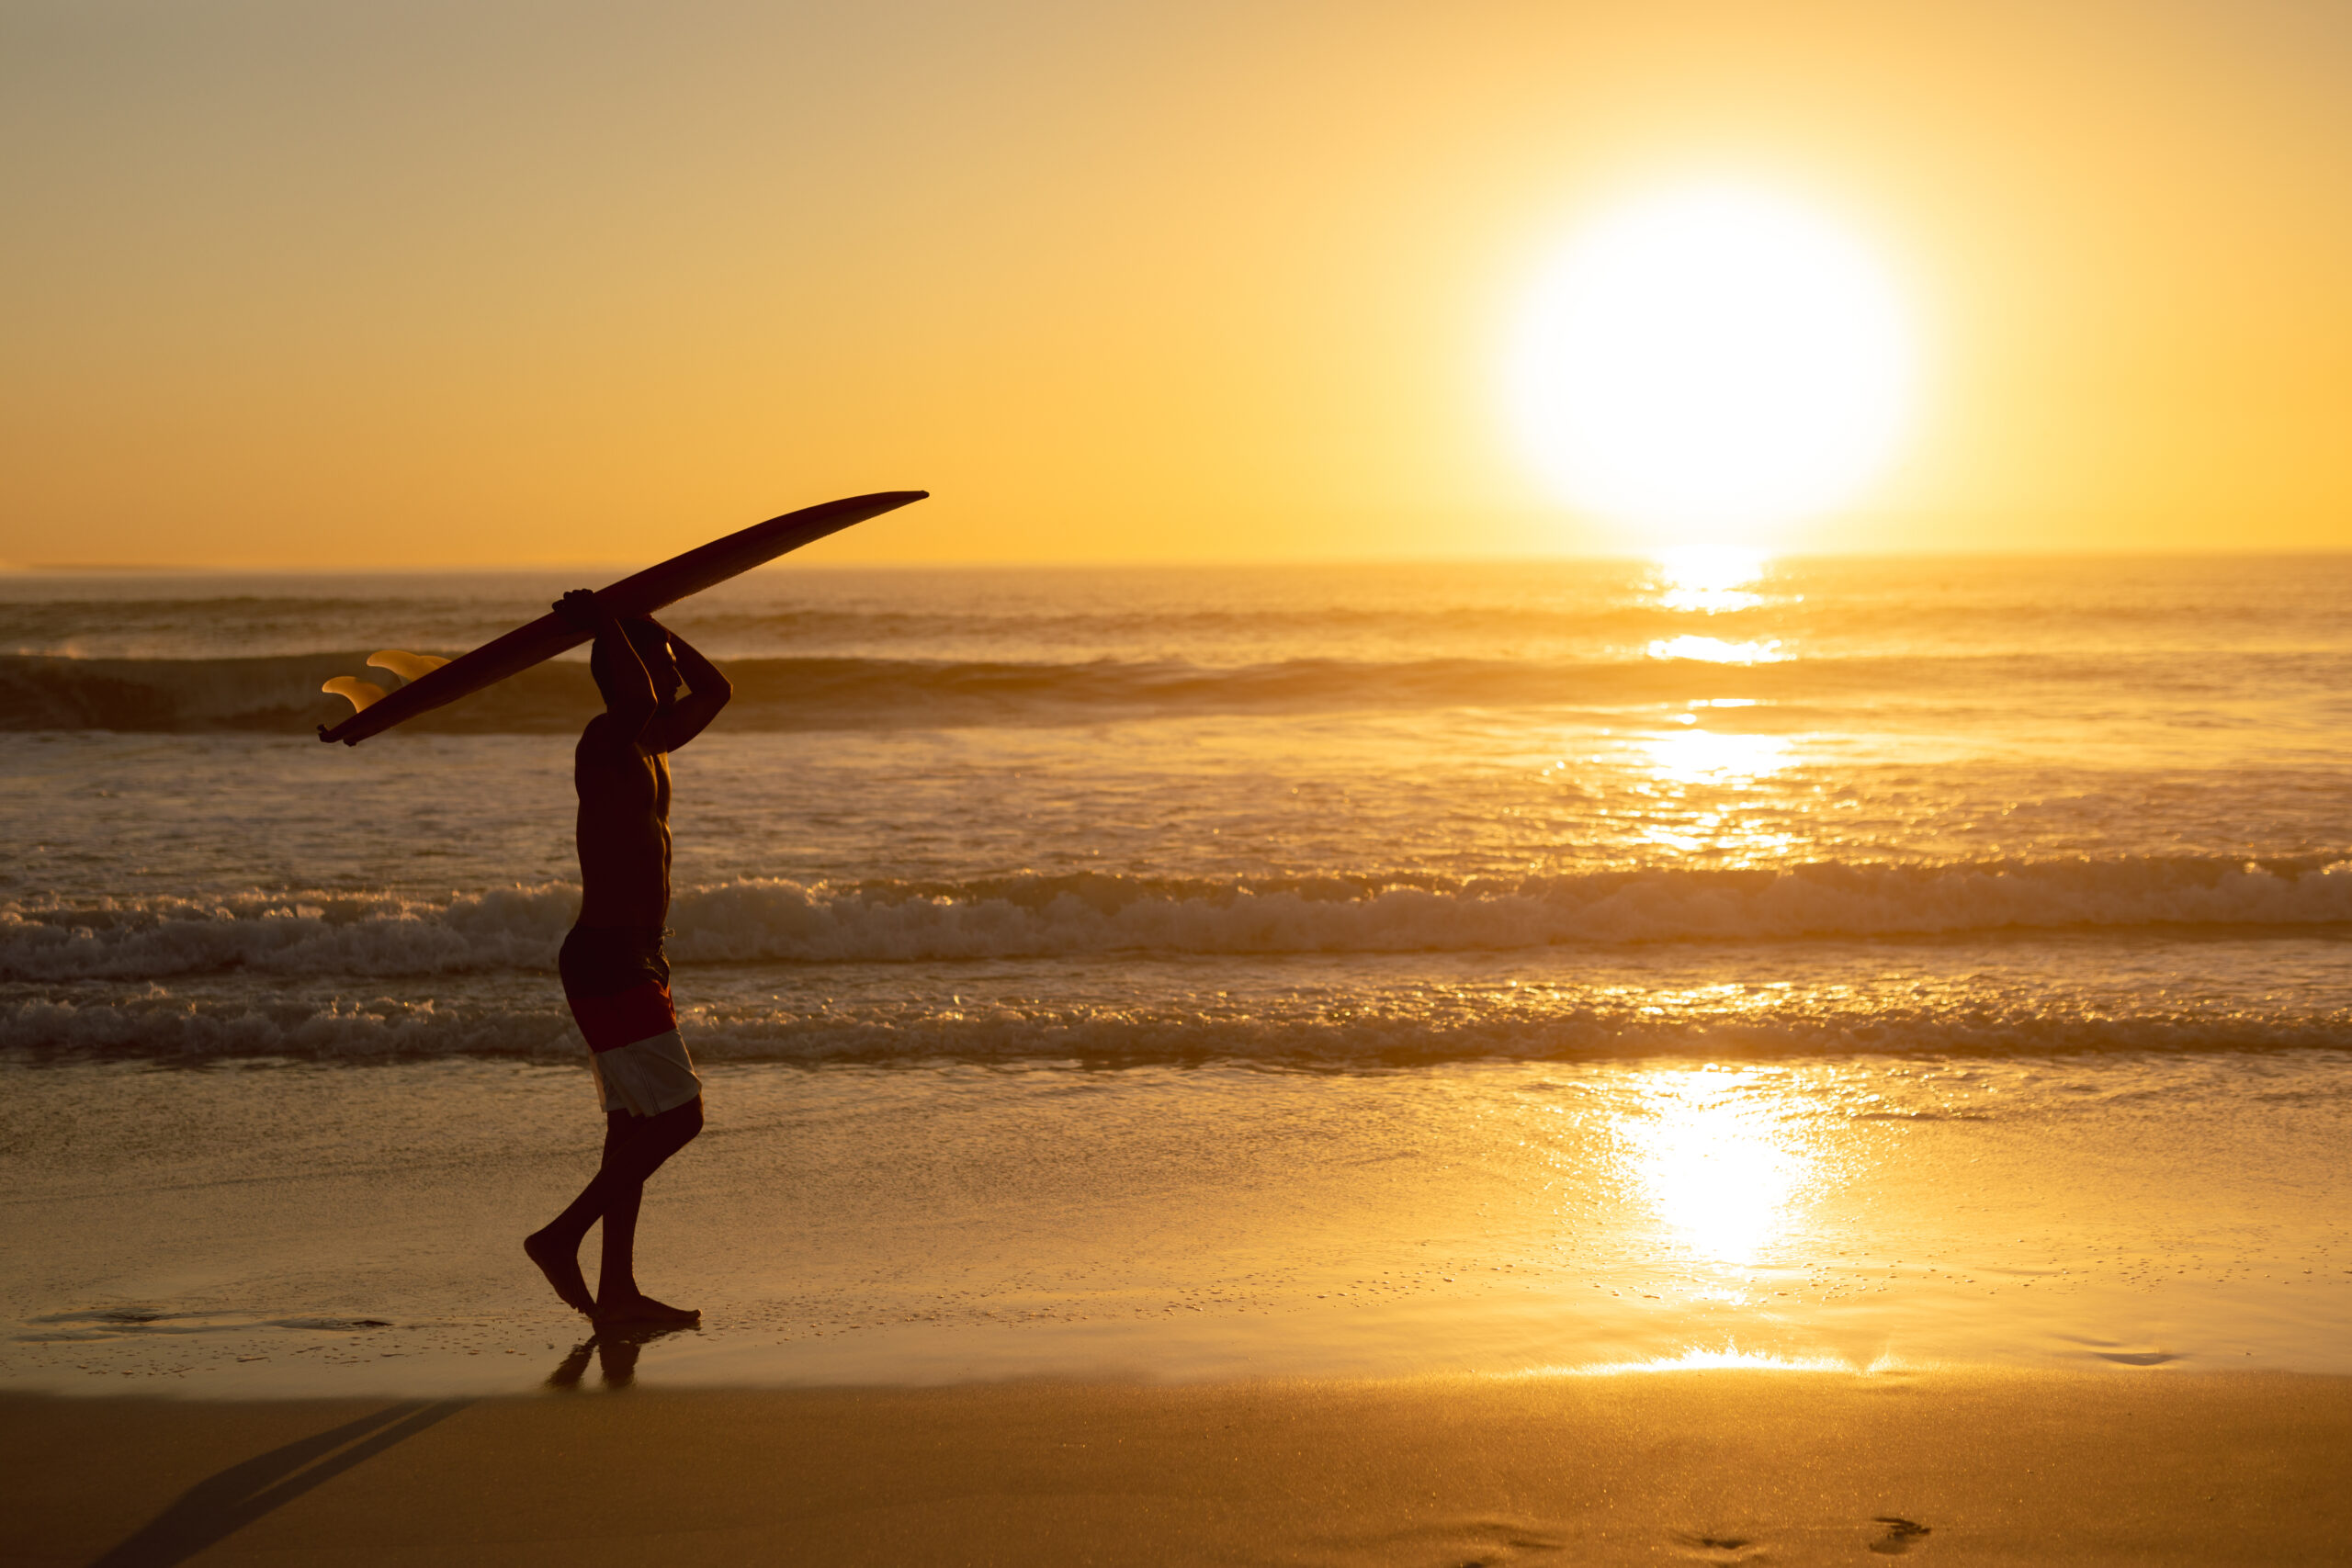 Man walking with surfboard on his head at beach during sunset